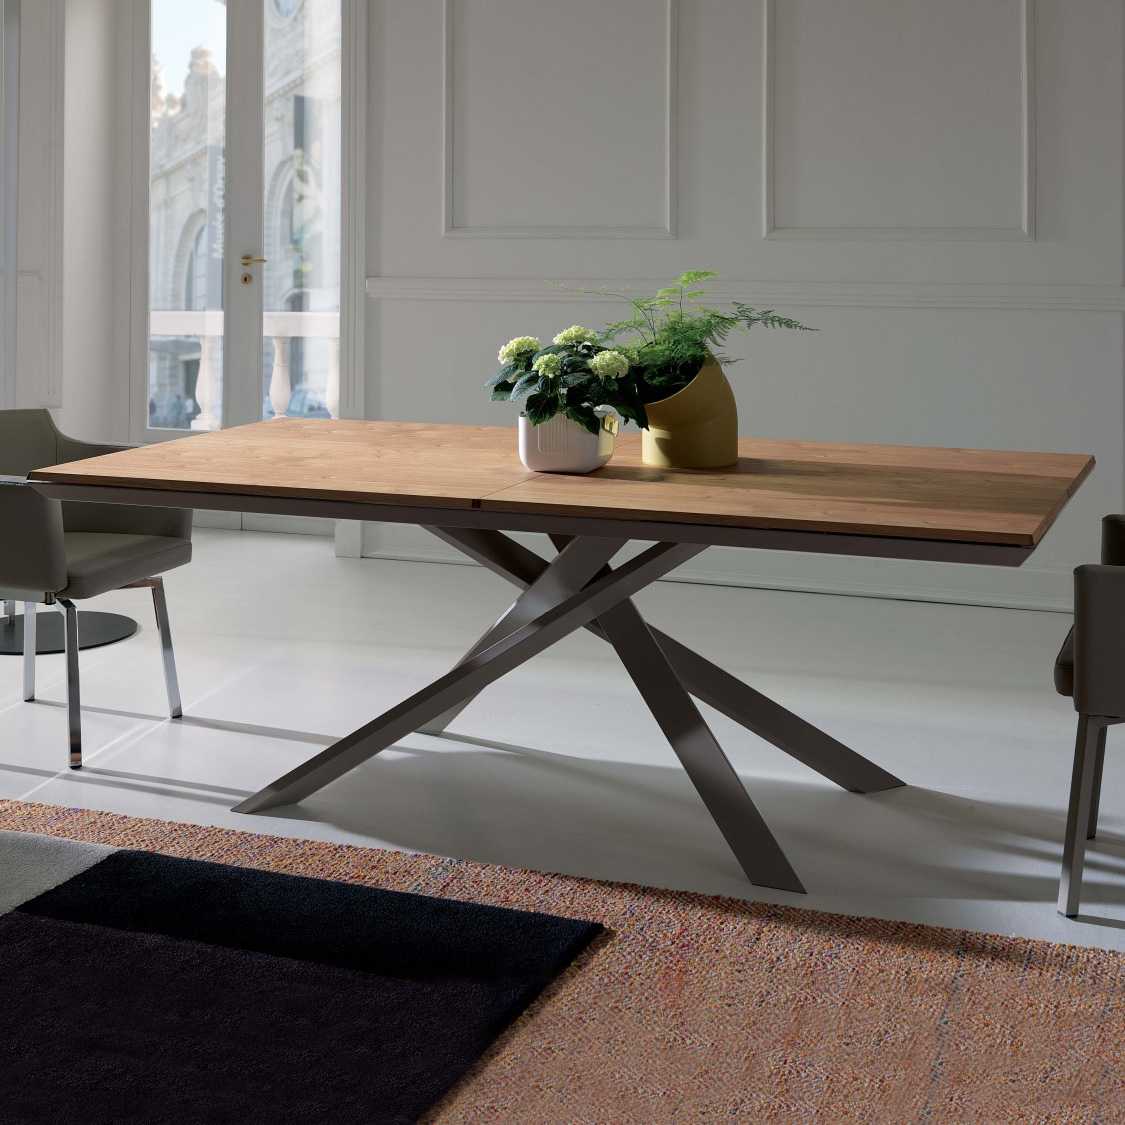 4x4 Ancient Large Dining Table by Ozzio